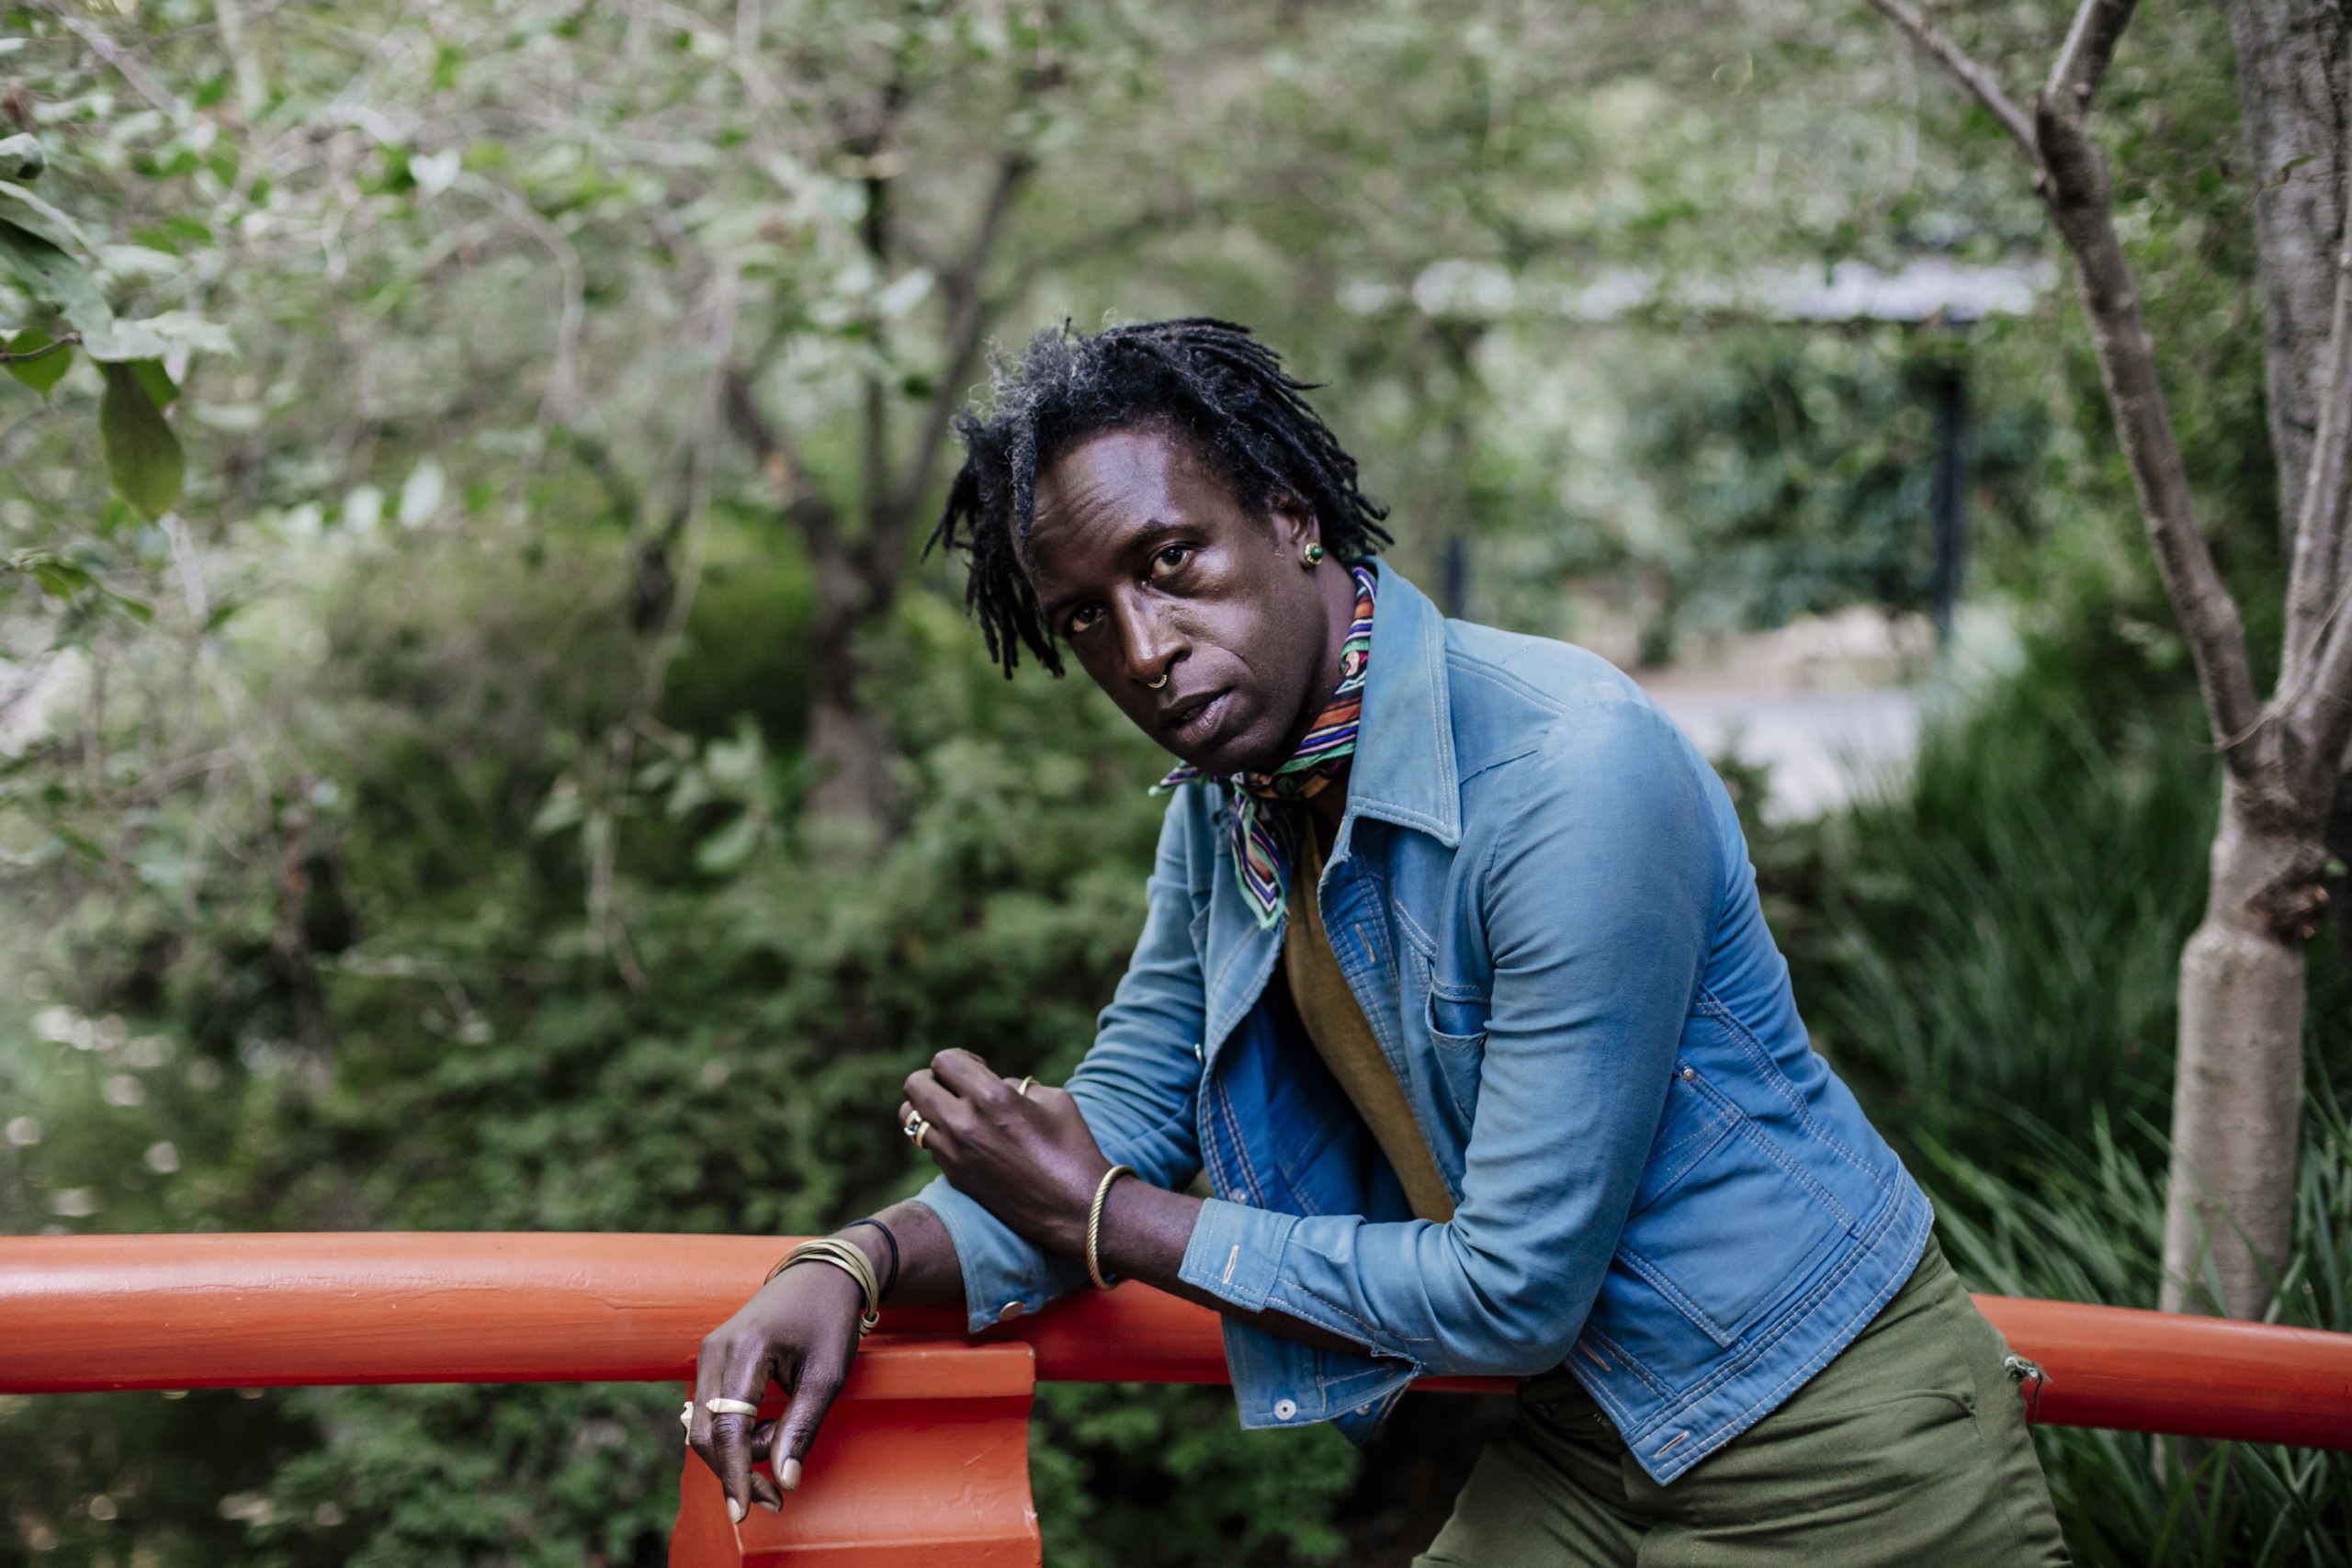 Ted Hearne & Saul Williams’ “Place:” A World Premiere